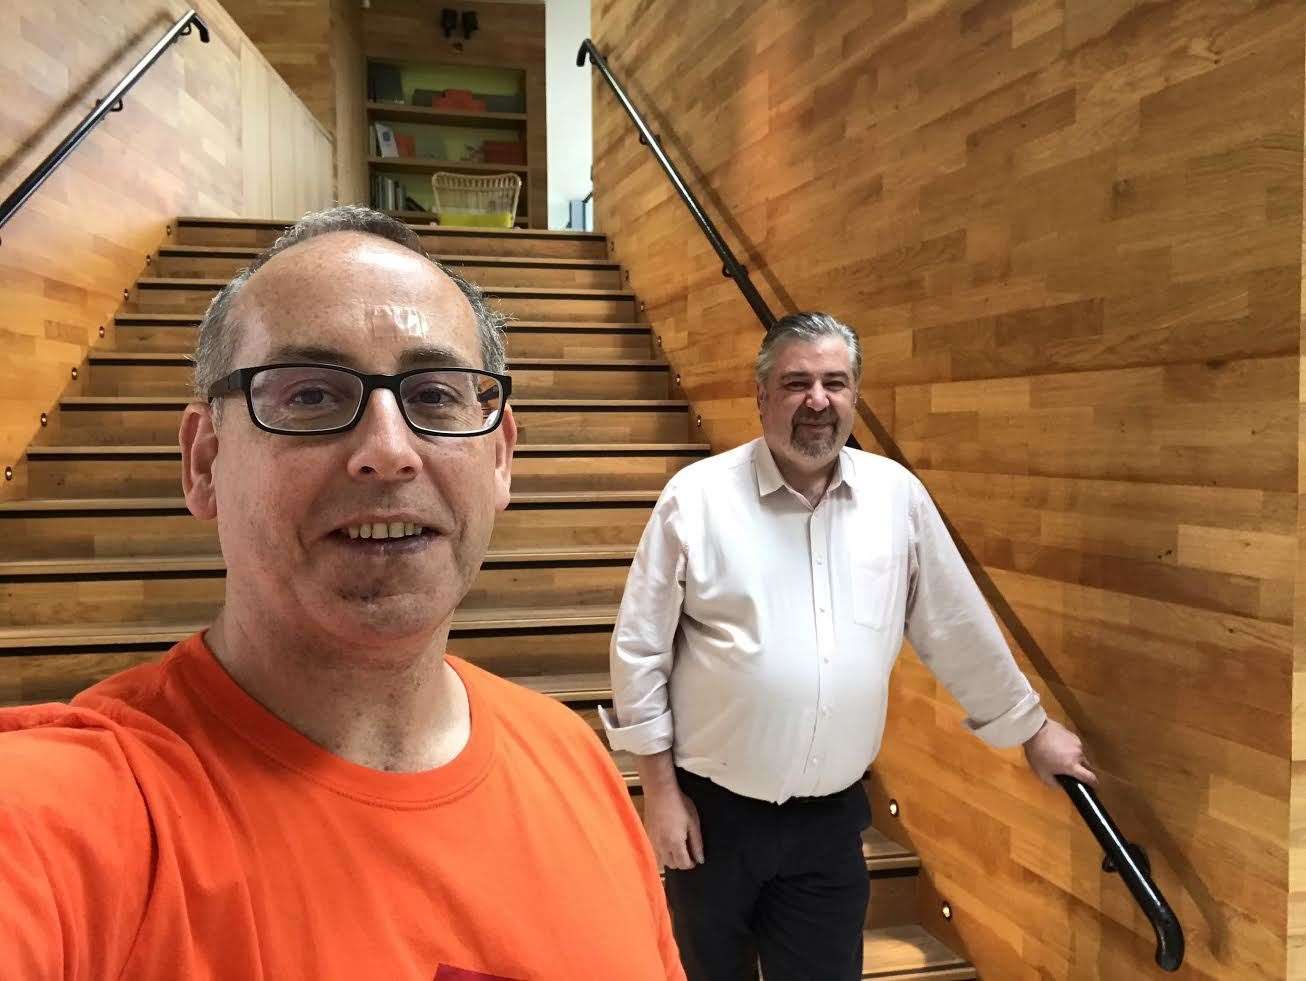 Centre Fundrasing Manager Richard Stewart and Maggie's Centre Head Kevin Matheson take on the miles for Maggies challenge.